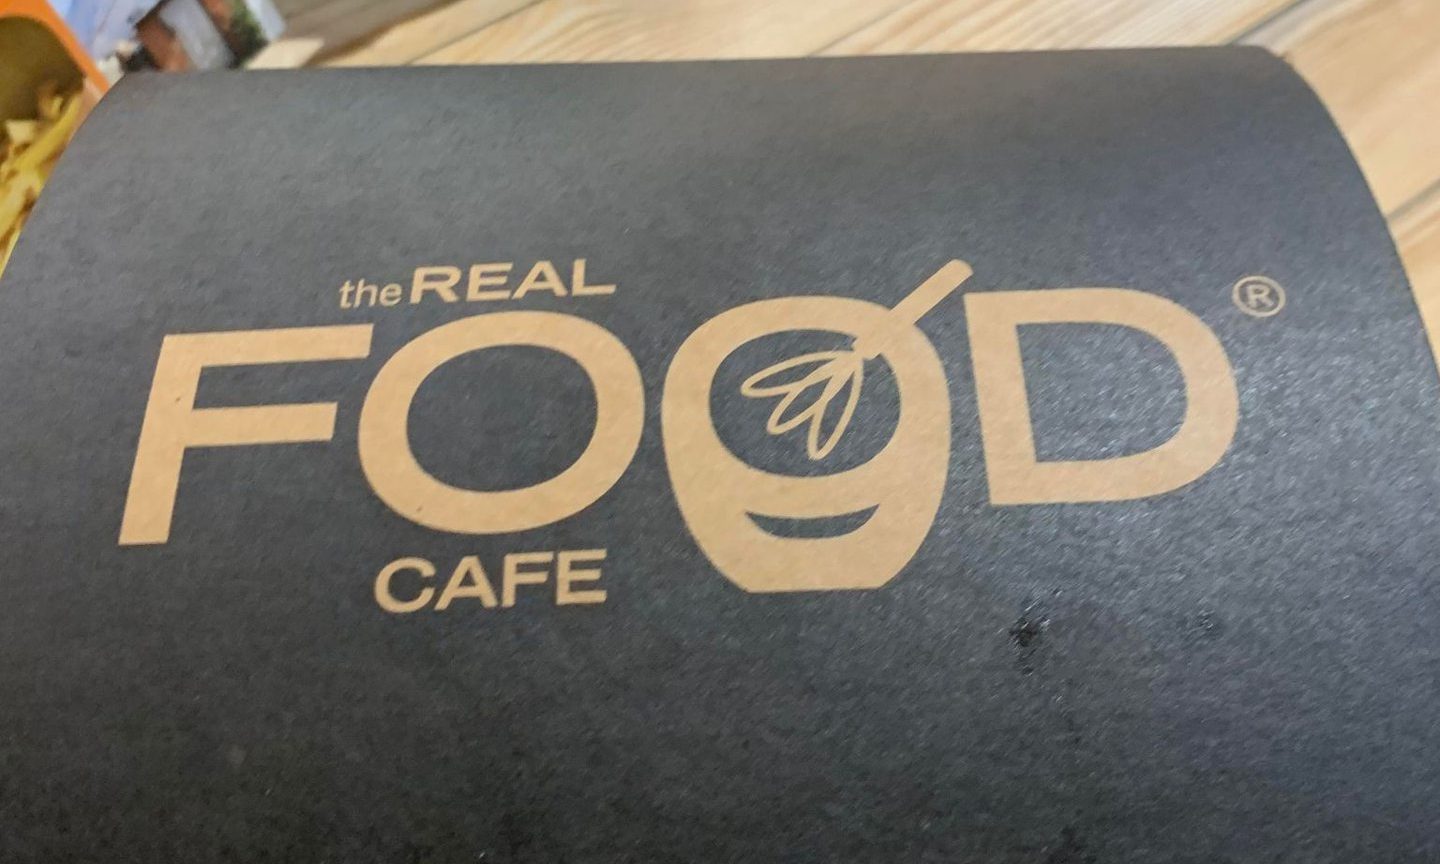 Real Food Cafe services up Brussels as part of a Christmas menu.